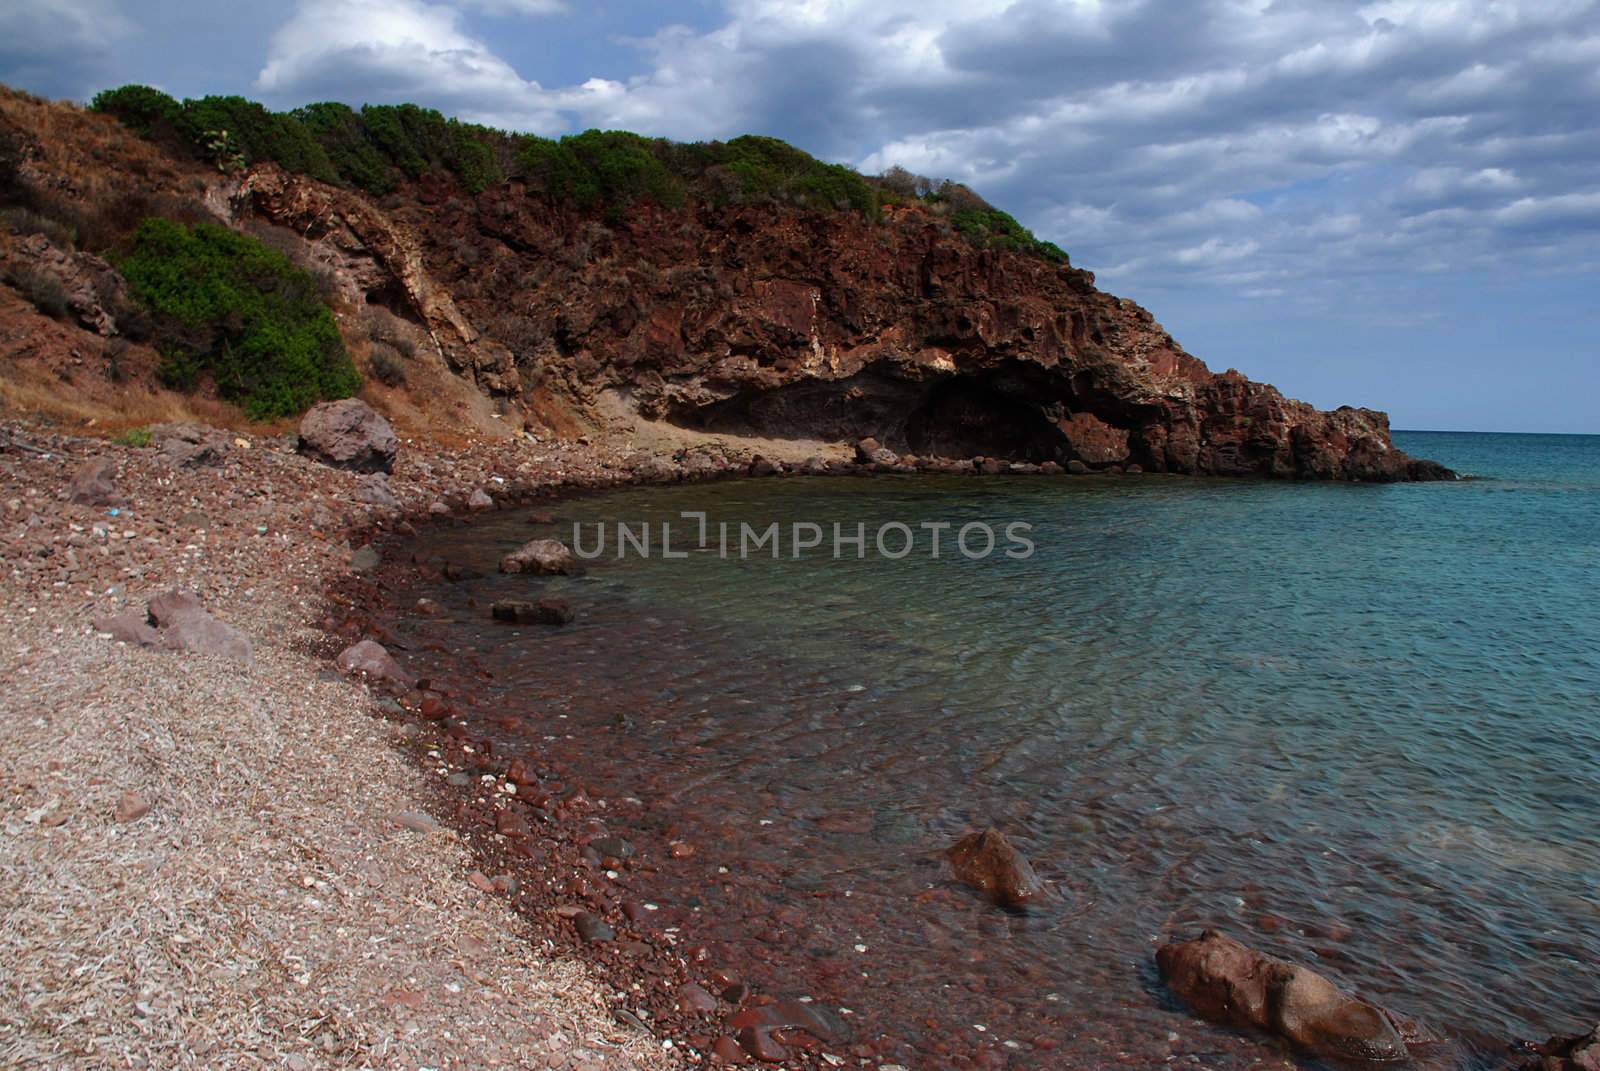 Beach surrounded by rock with a cave in the end